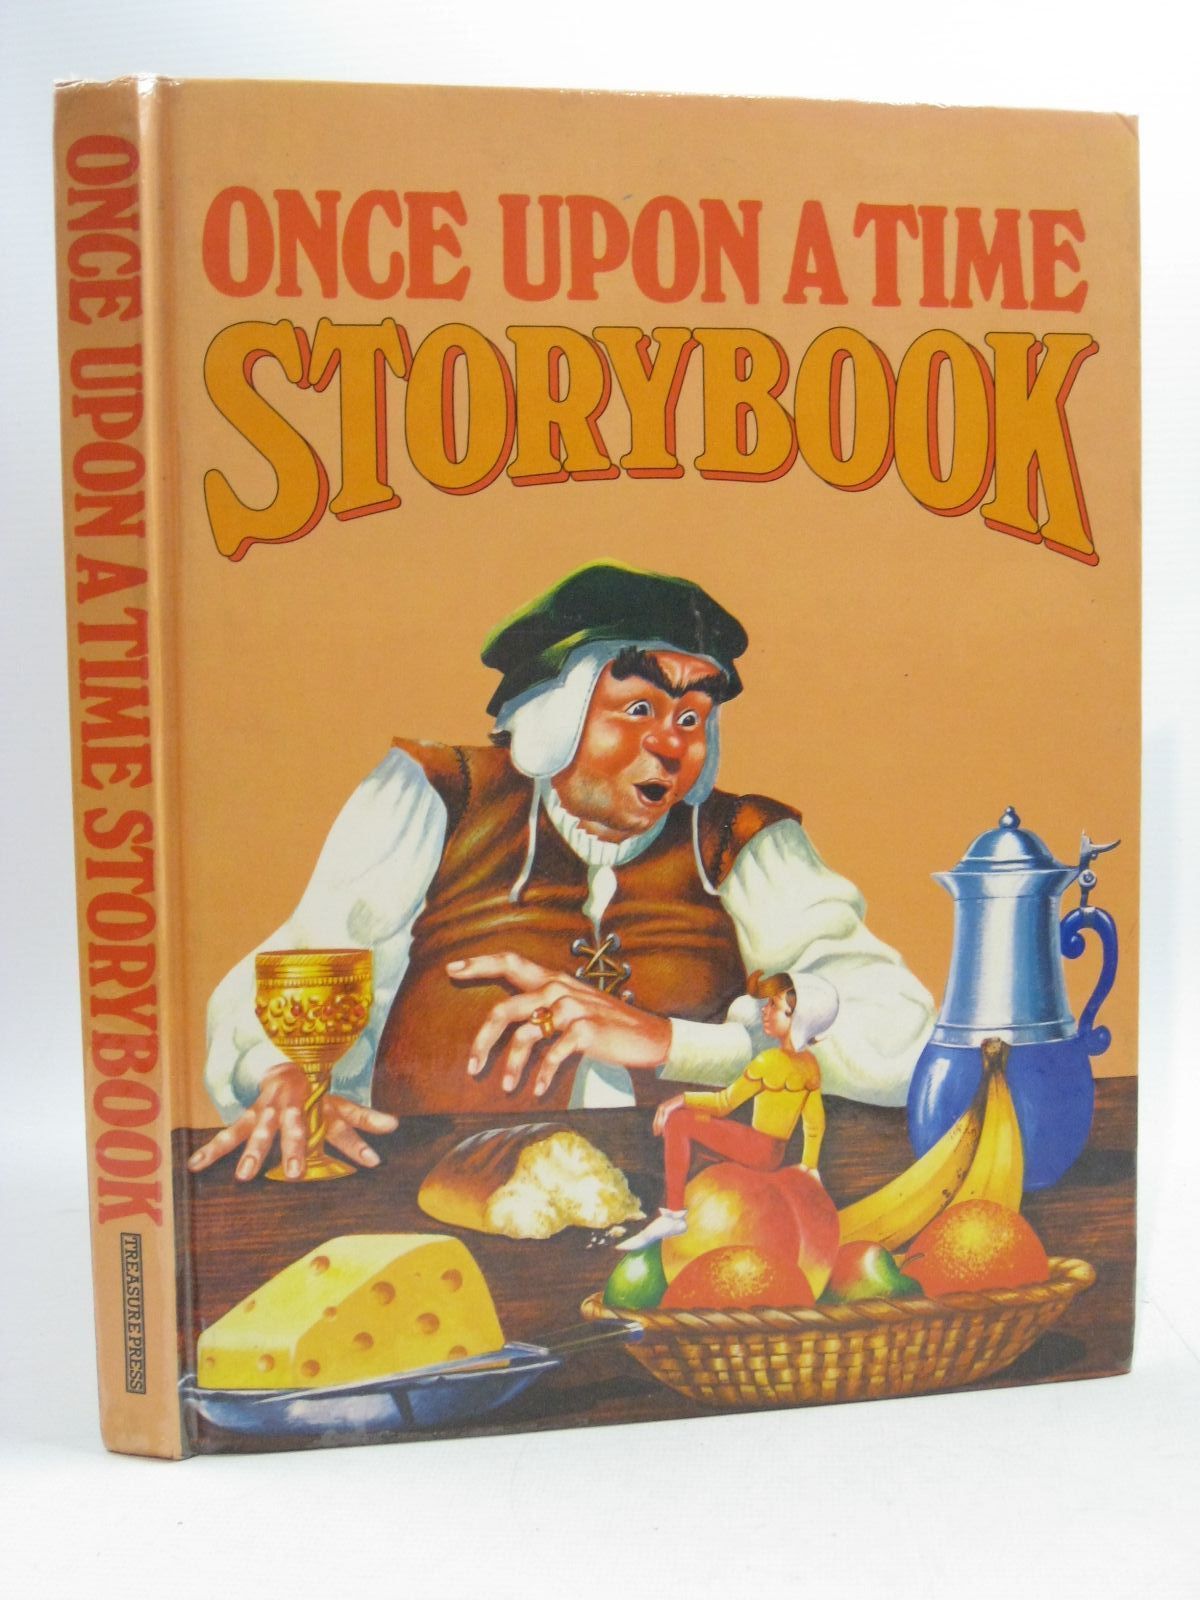 Cover of ONCE UPON A TIME STORYBOOK by Jane Carruth